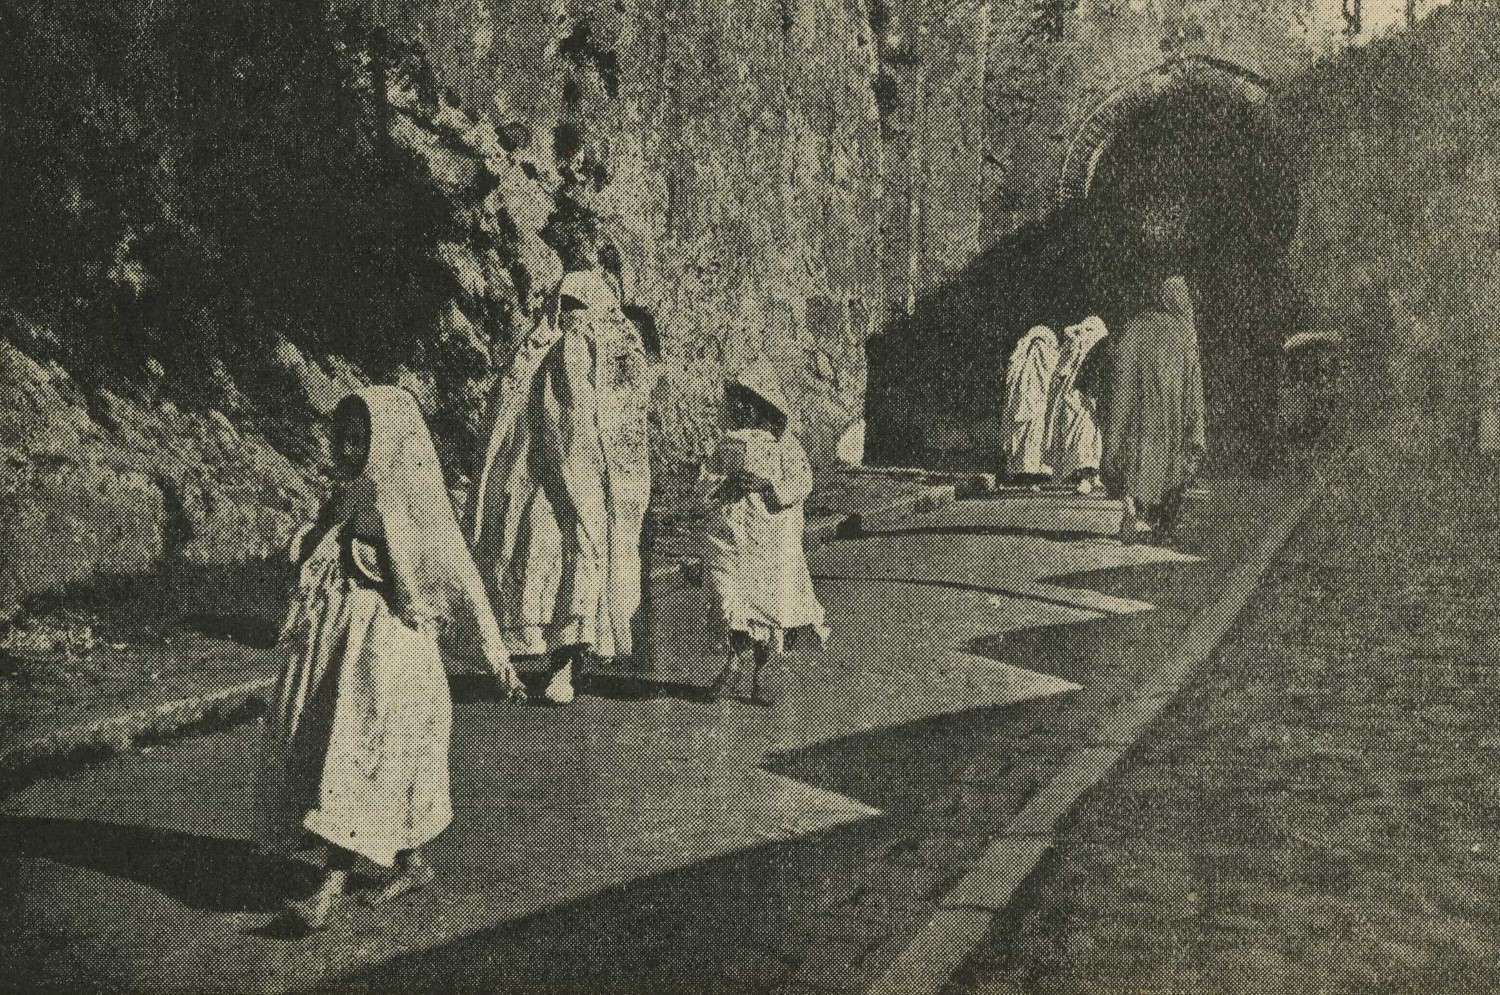 Women in traditional dress at Marshan Gate